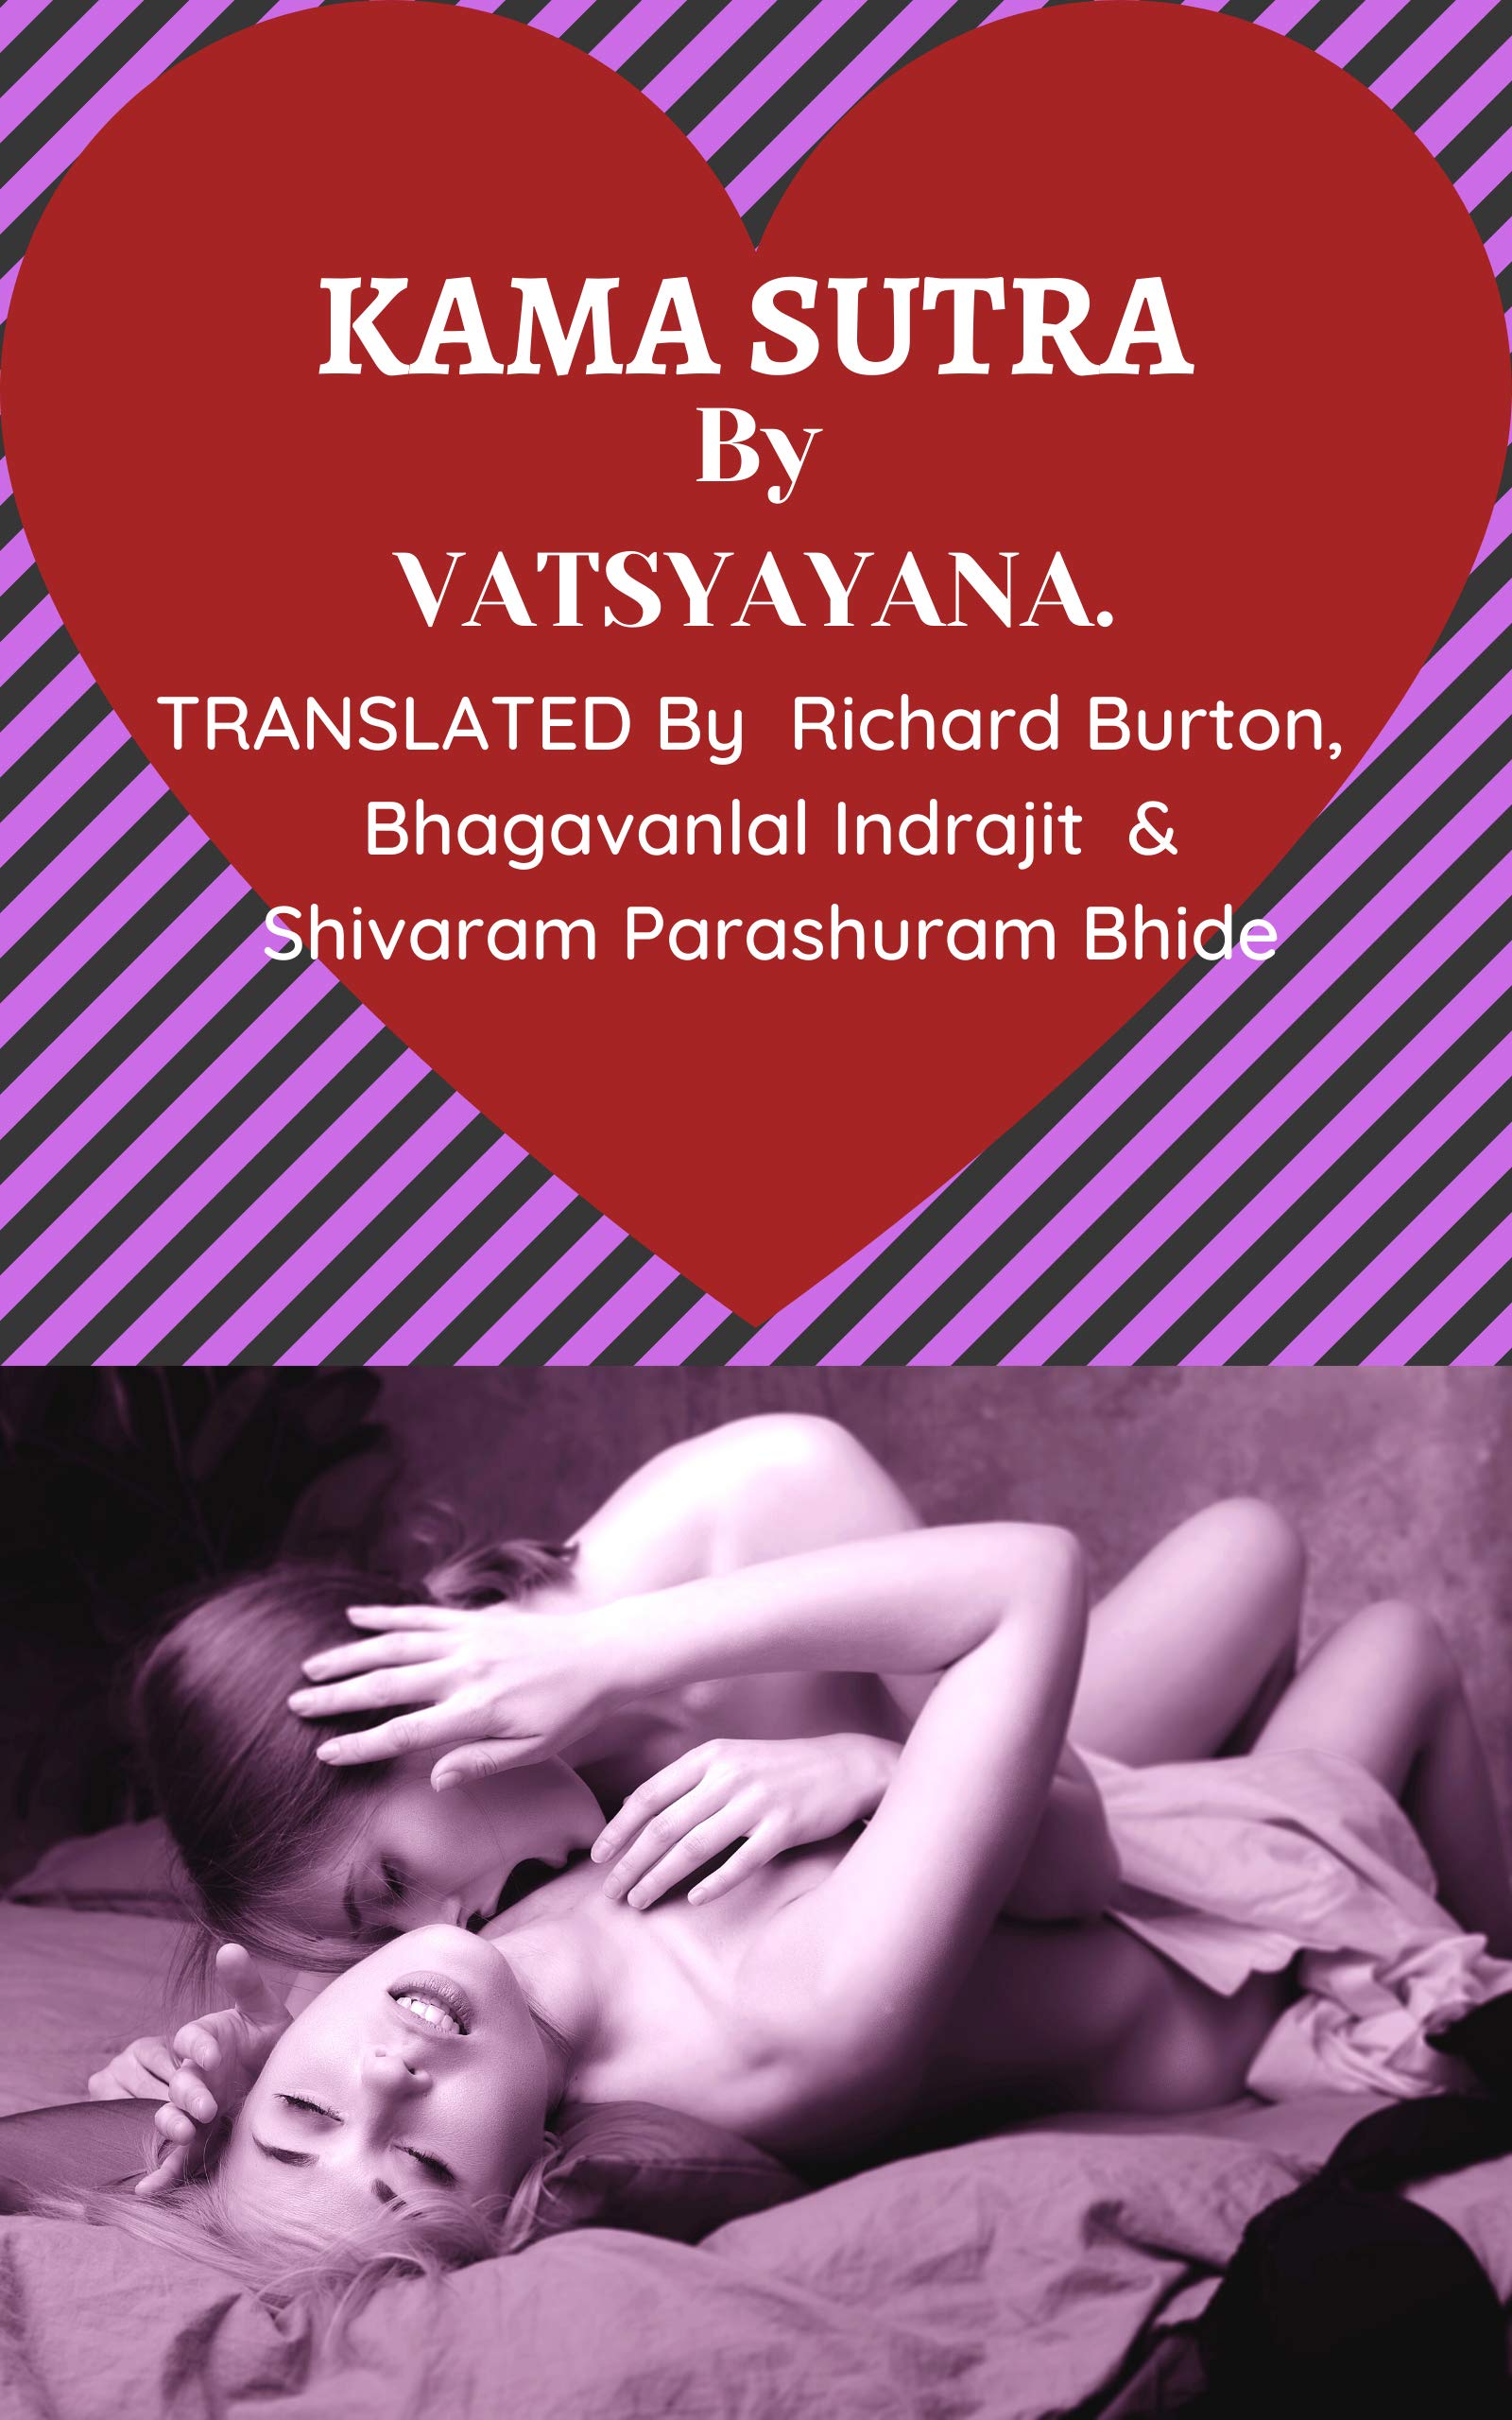 andy stich recommends kamasutra book summary with pictures pic